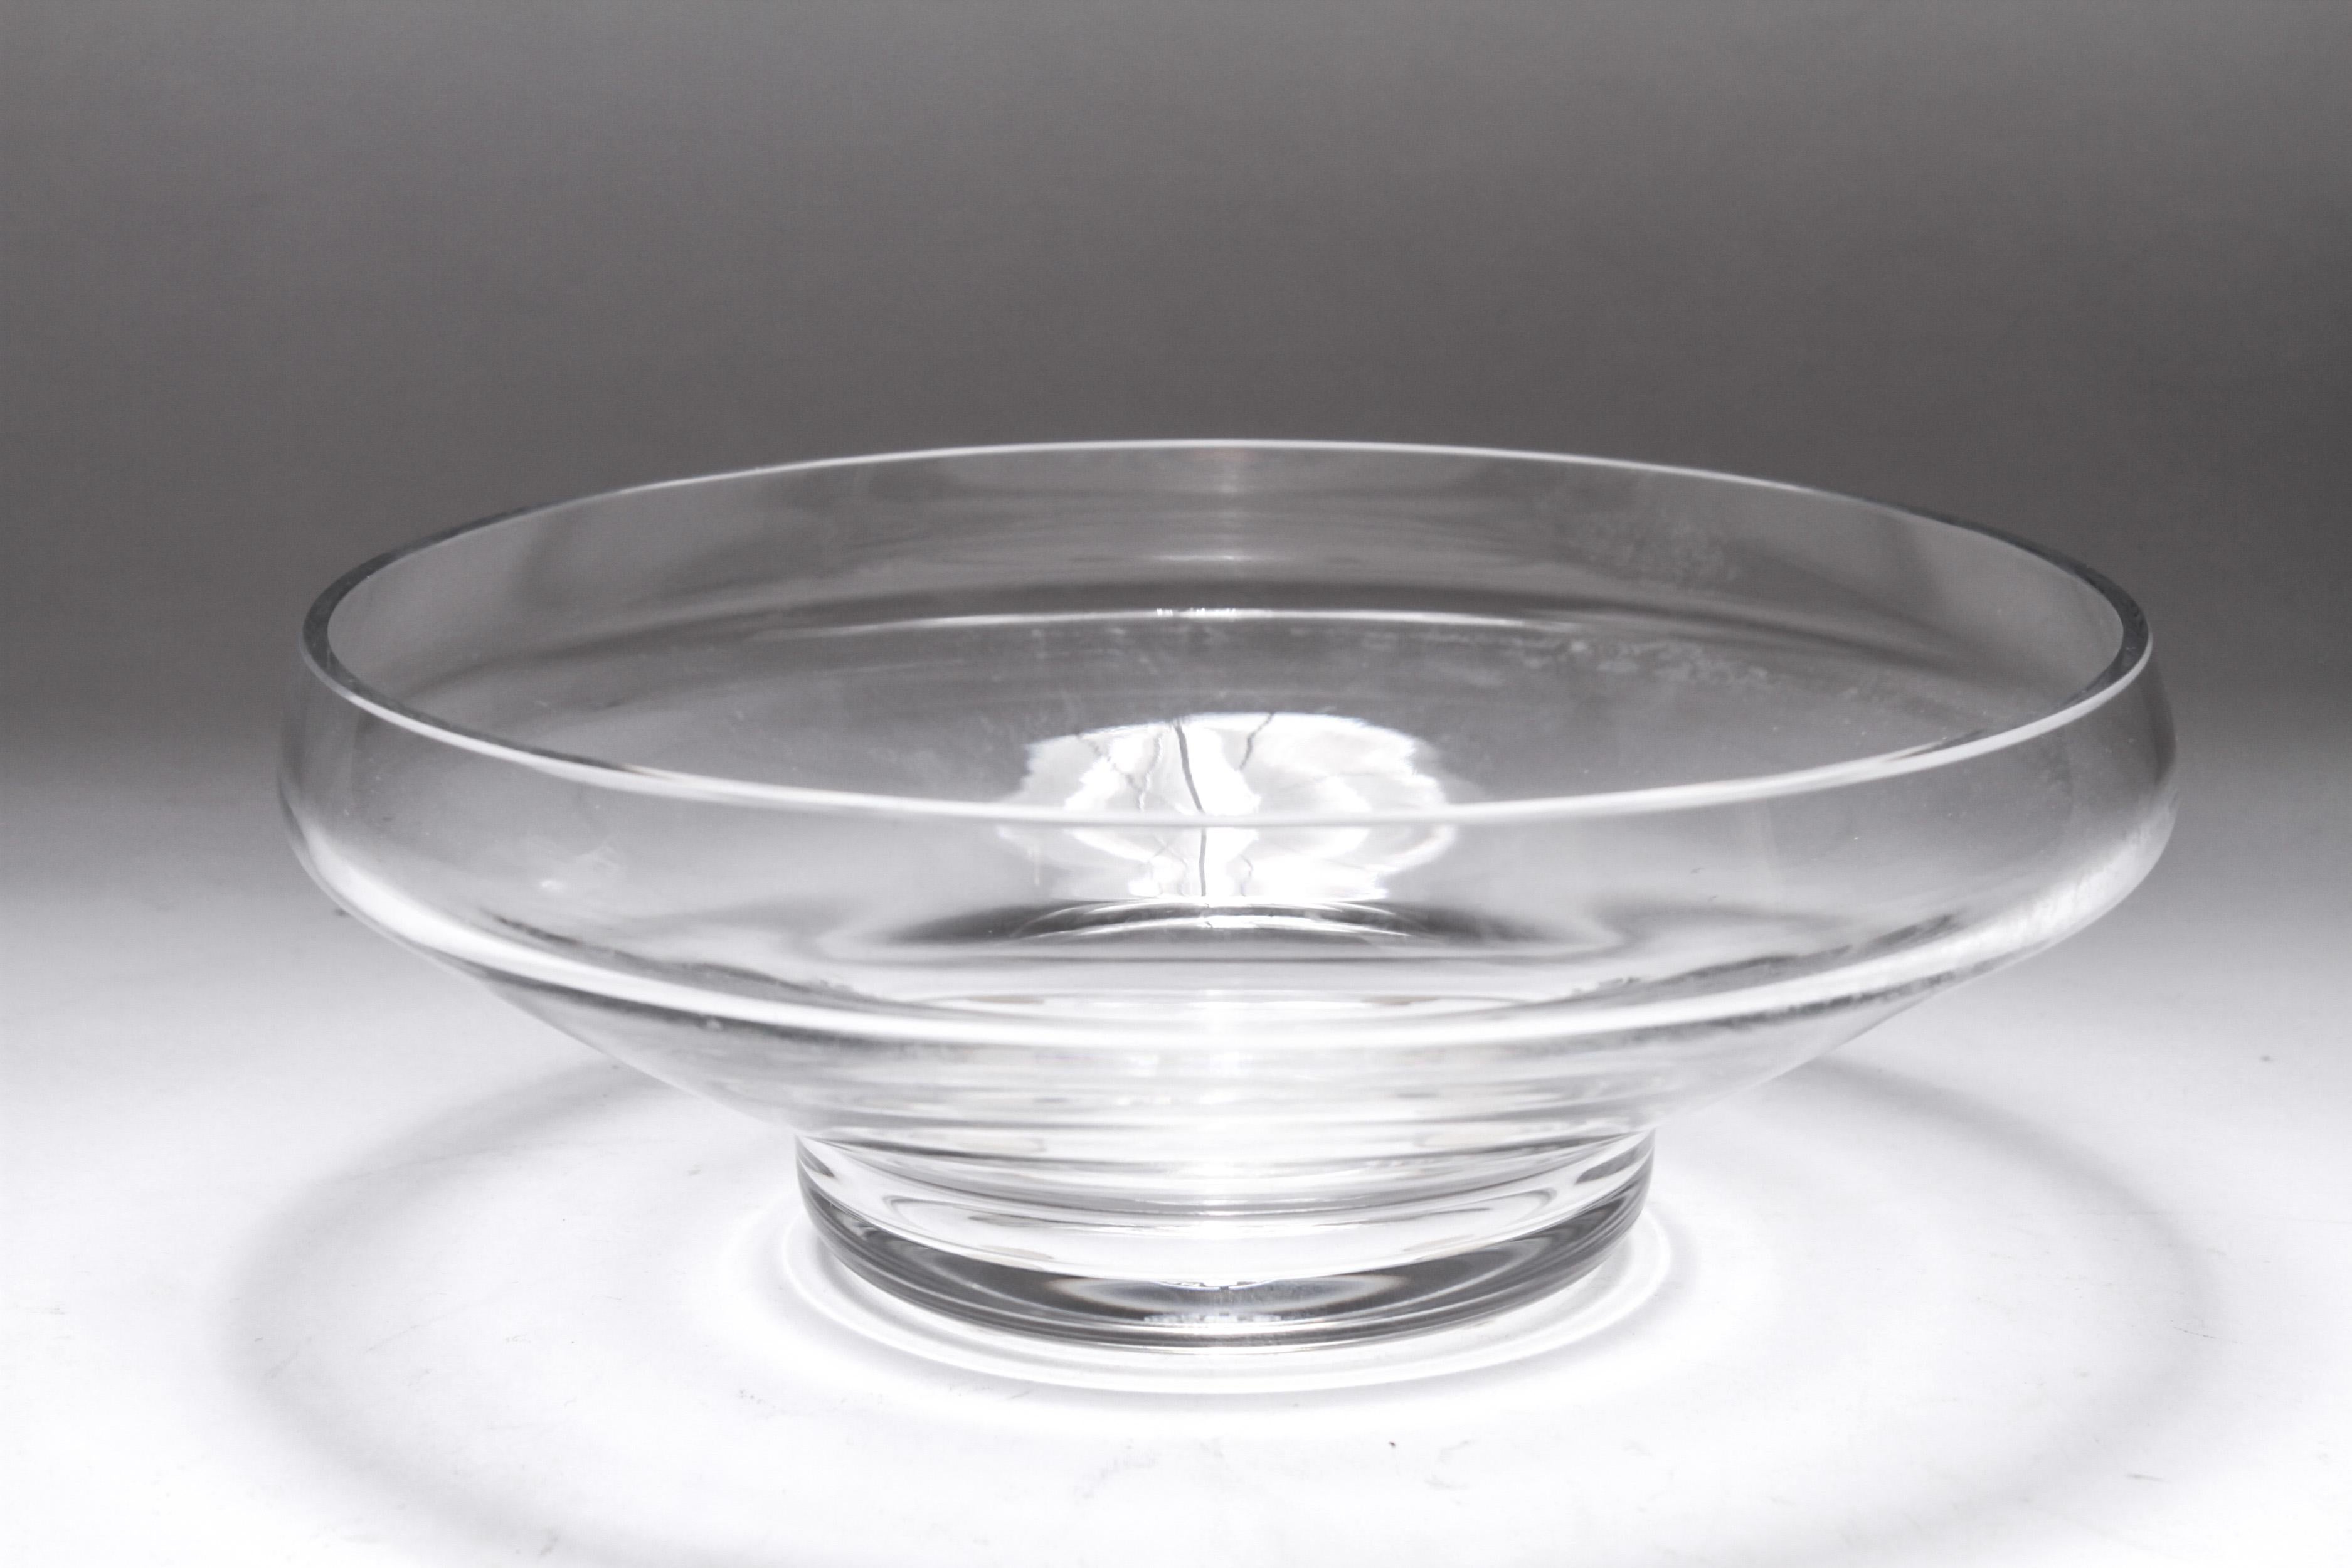 French modern crystal dish or bowl made by Baccarat. The piece has an acid-etched maker's mark to the underside. In great vintage condition with age-appropriate wear and use.